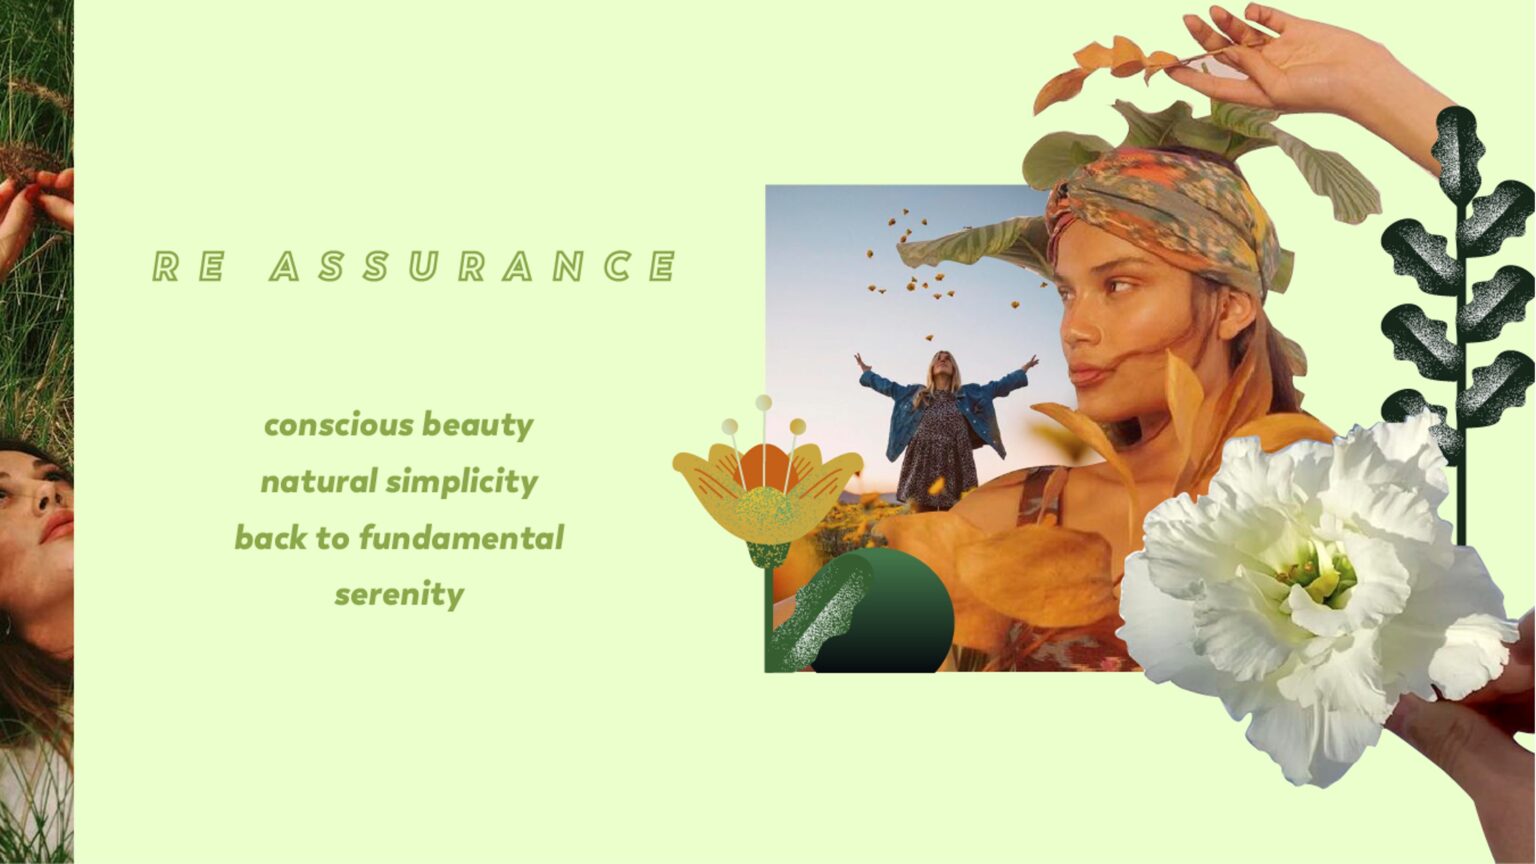 Re-assurance trends: conscious beauty, natural simplicity, back to fundamental, serenity